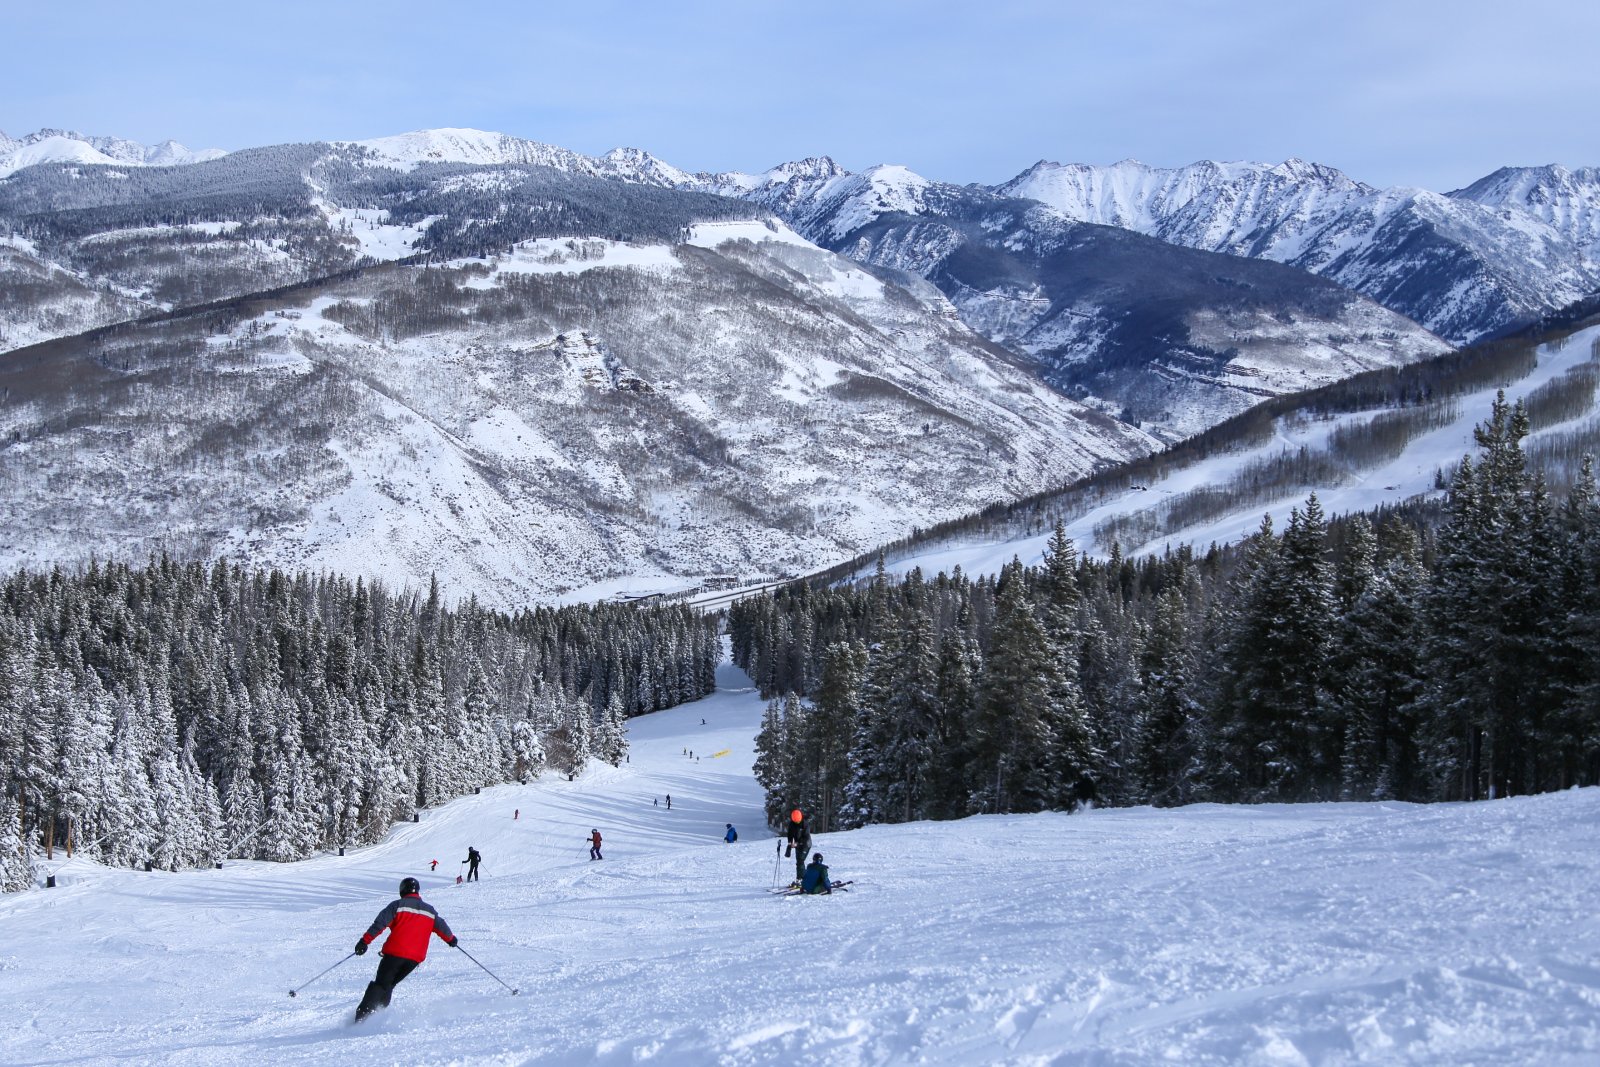 <p>The state’s outdoor activities and scenic beauty generate over $22 billion in tourism revenue. Ski resort lift tickets can exceed $200 per day during peak season.</p>